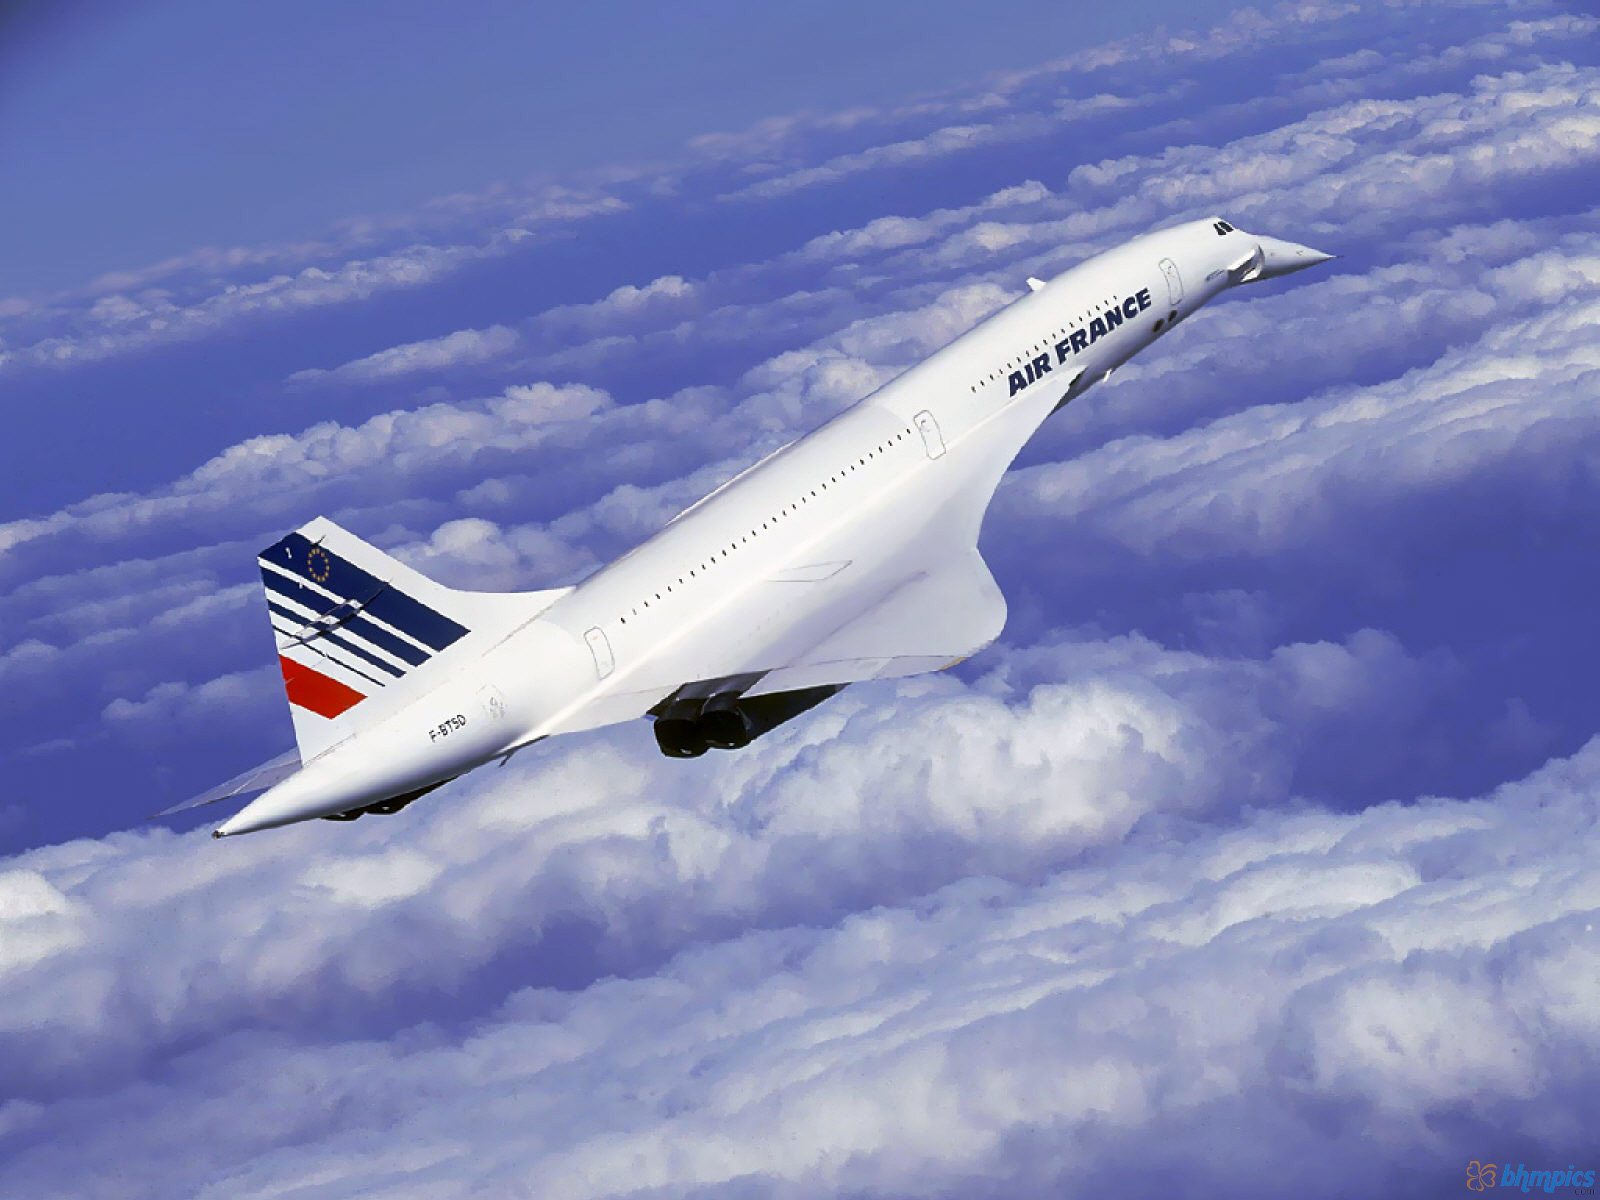 Air France Flight 4590, a Concorde supersonic passenger jet, F-BTSC, crashes just after takeoff from Paris killing all 109 aboard and 4 on the ground